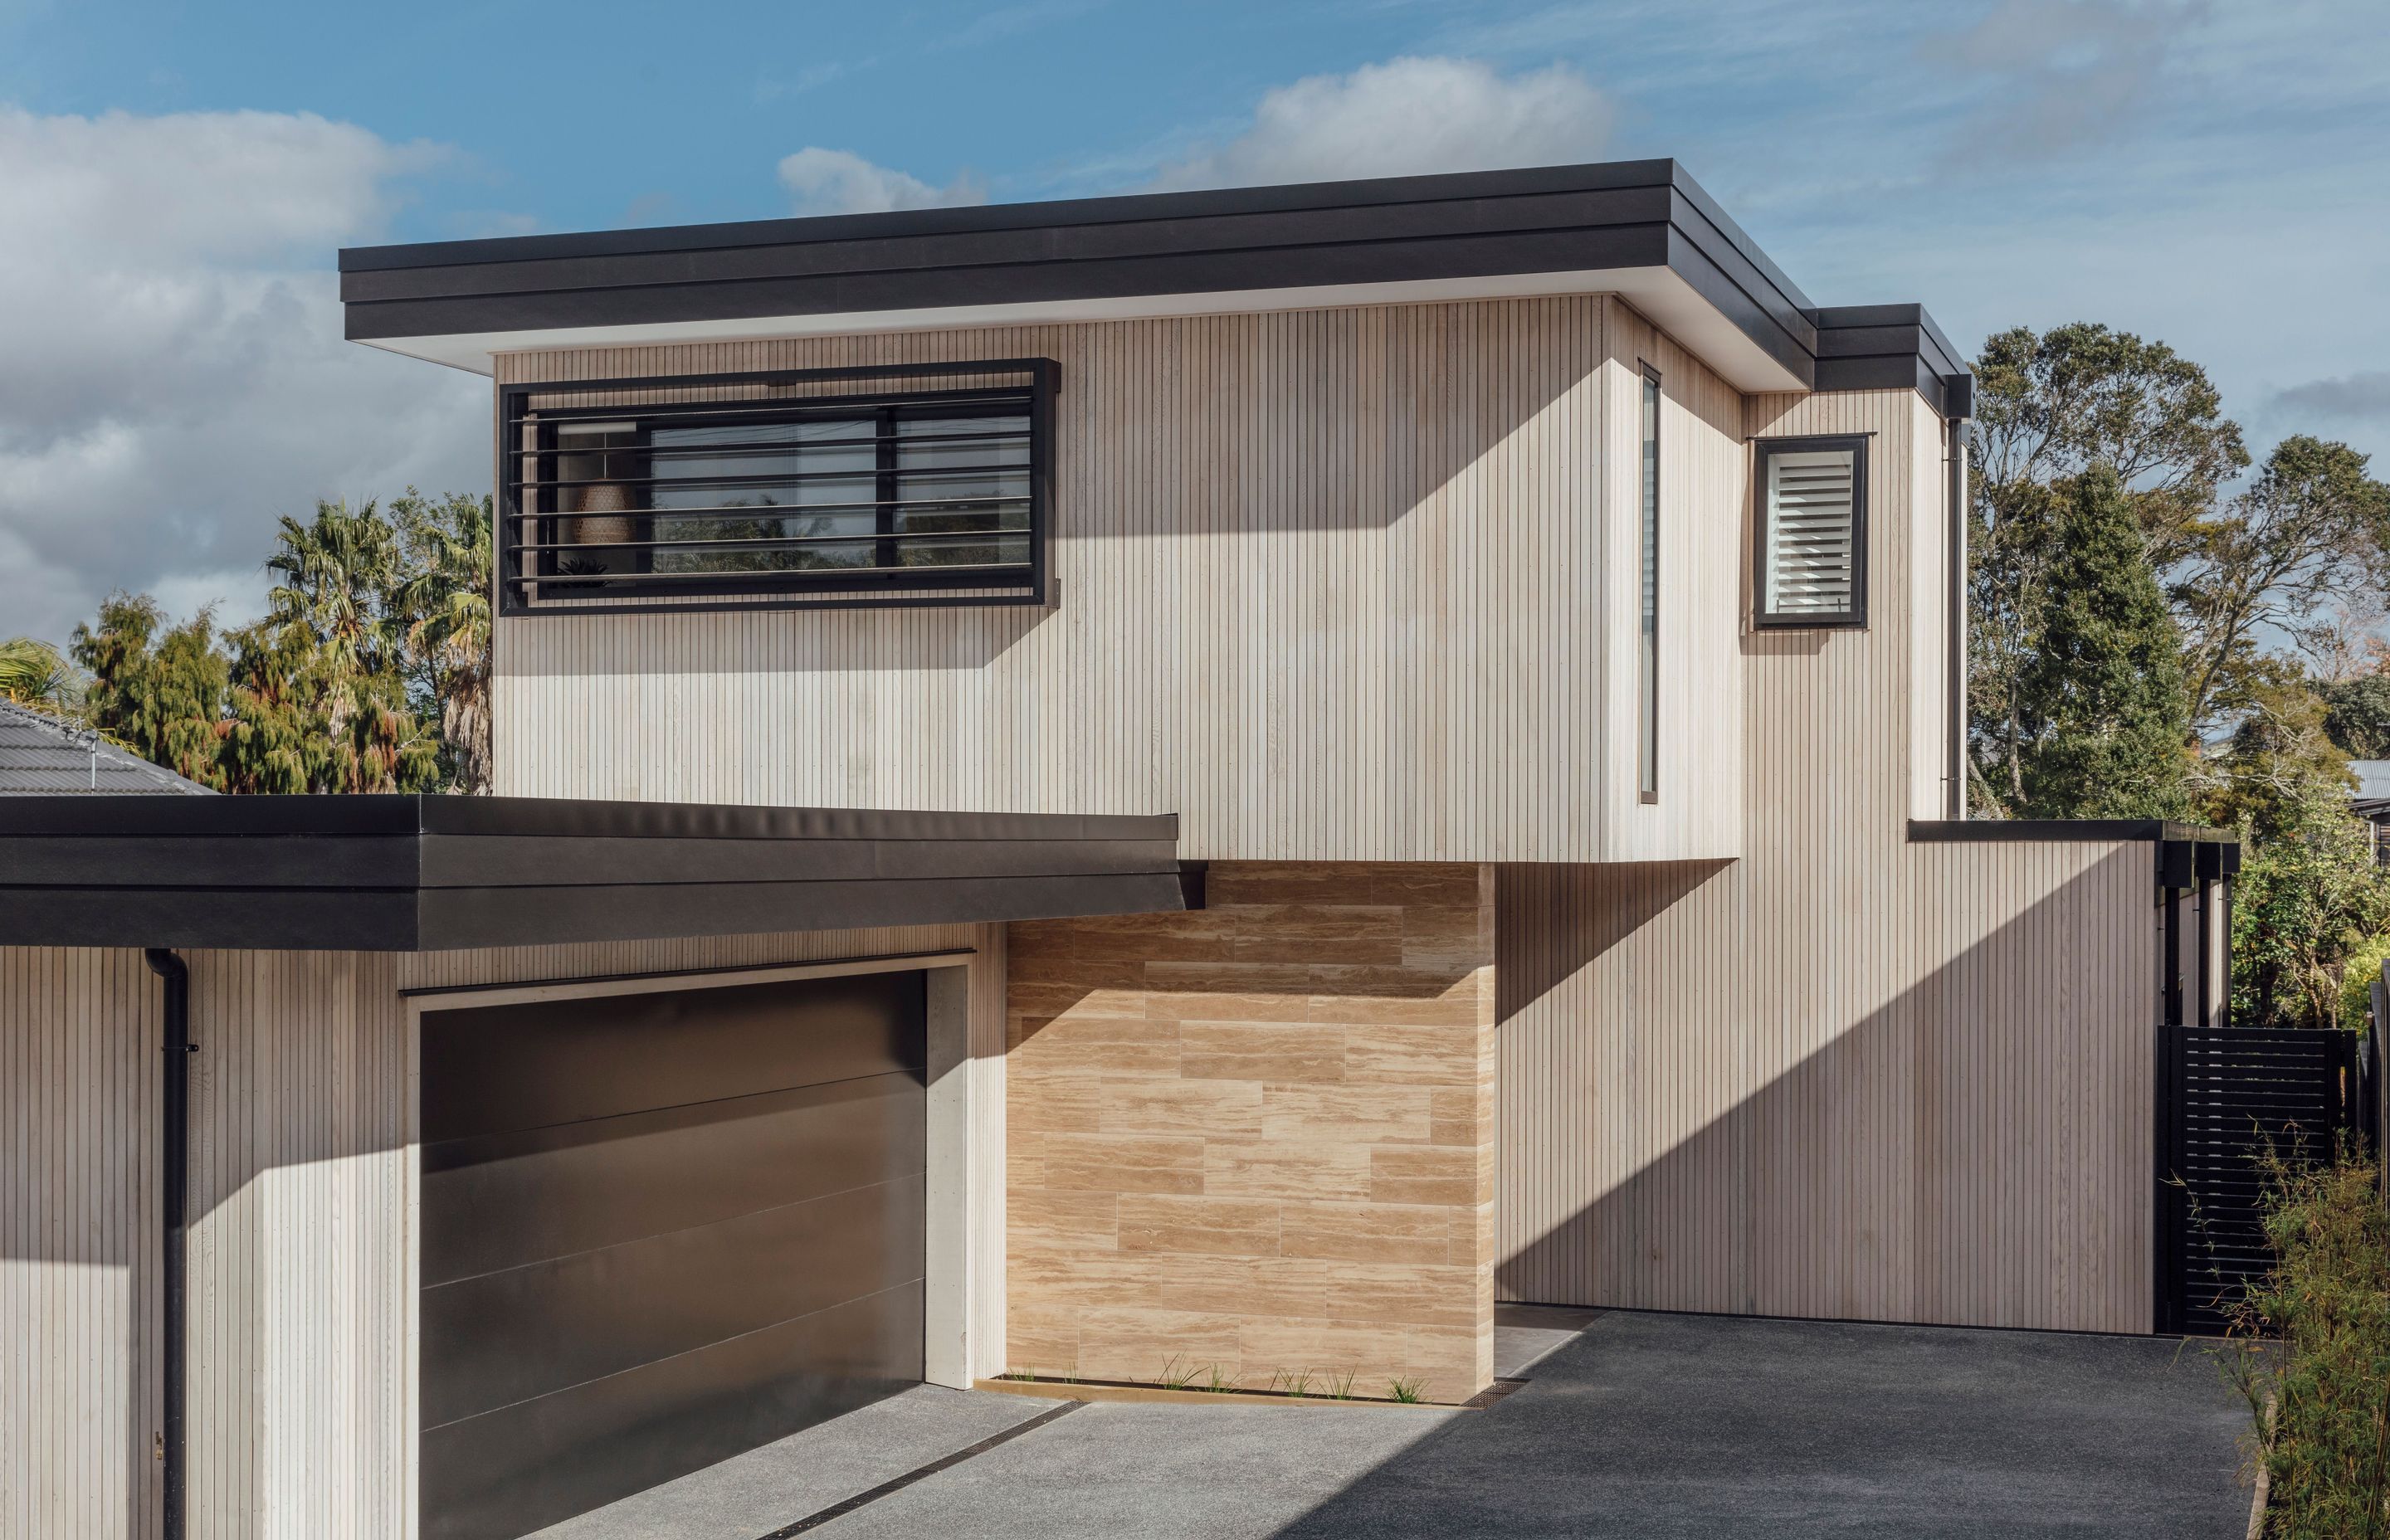 From the street, the home, with its horizontal roof planes, looks decidedly modern. The cladding of narrow cedar board runs vertically in gentle counterpoint.